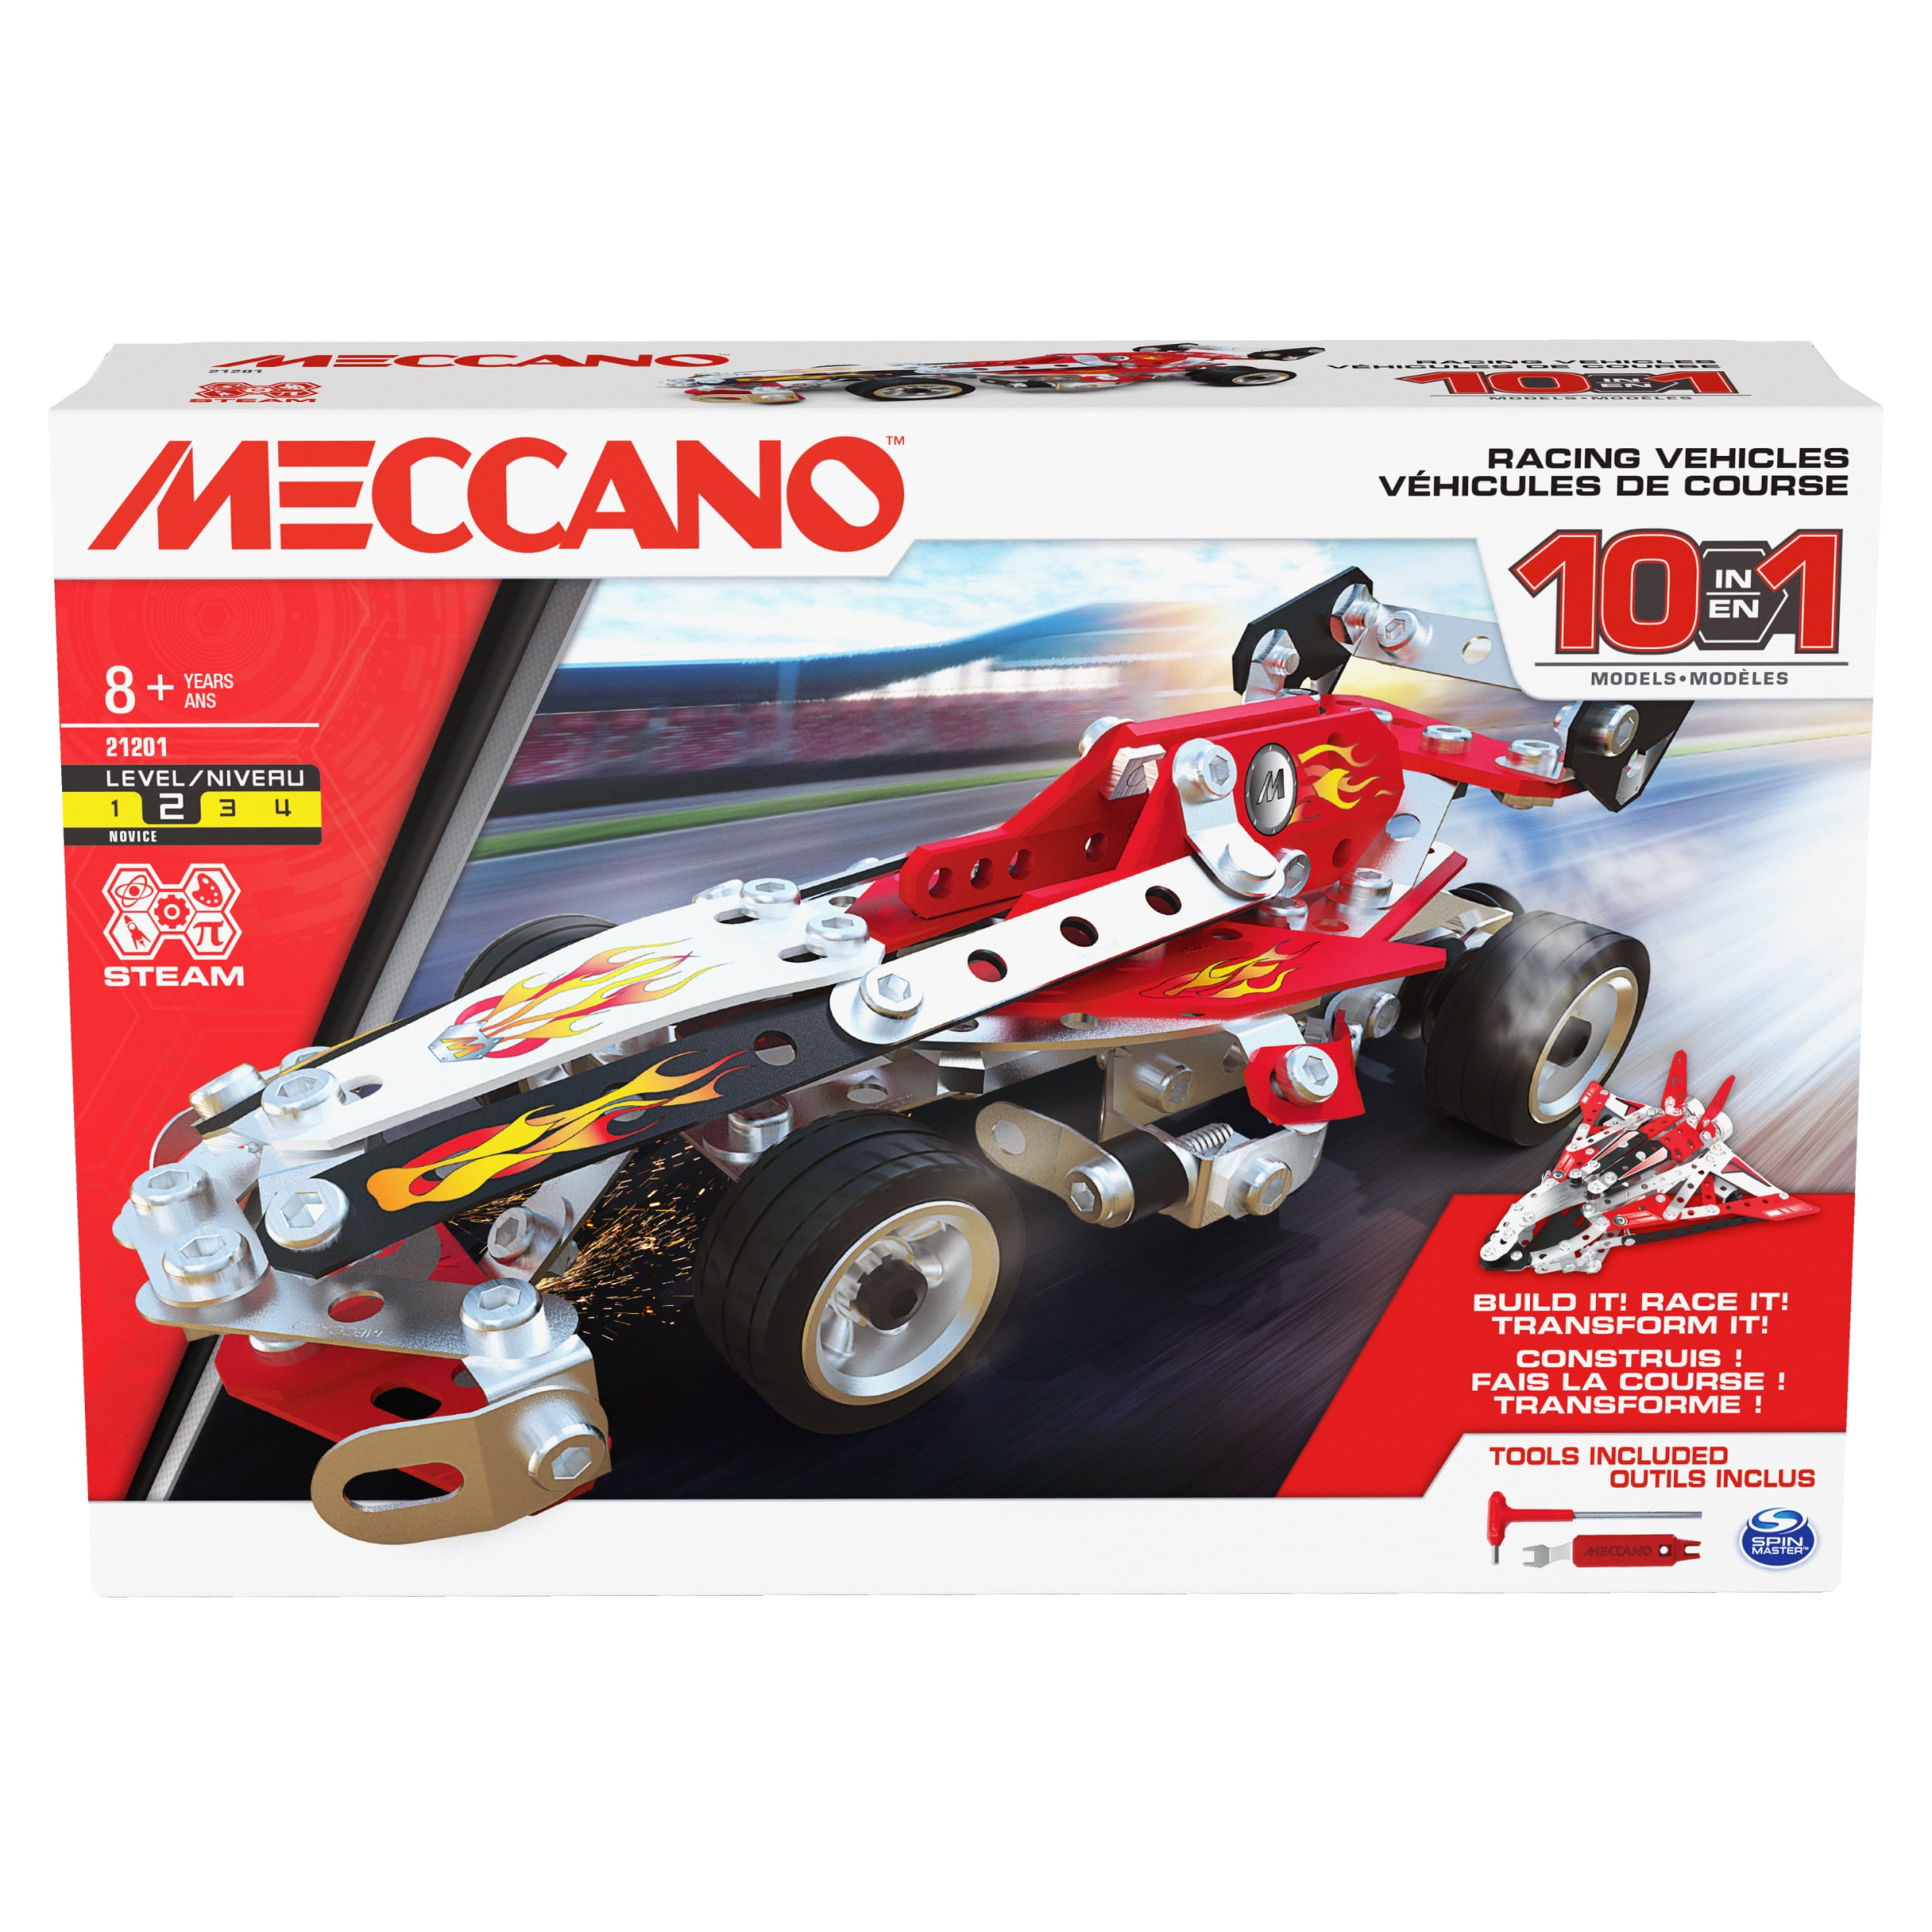 Meccano by Erector, Bulldozer Model Vehicle Building Kit, STEM Engineering  Education Toy for Ages 8 and up